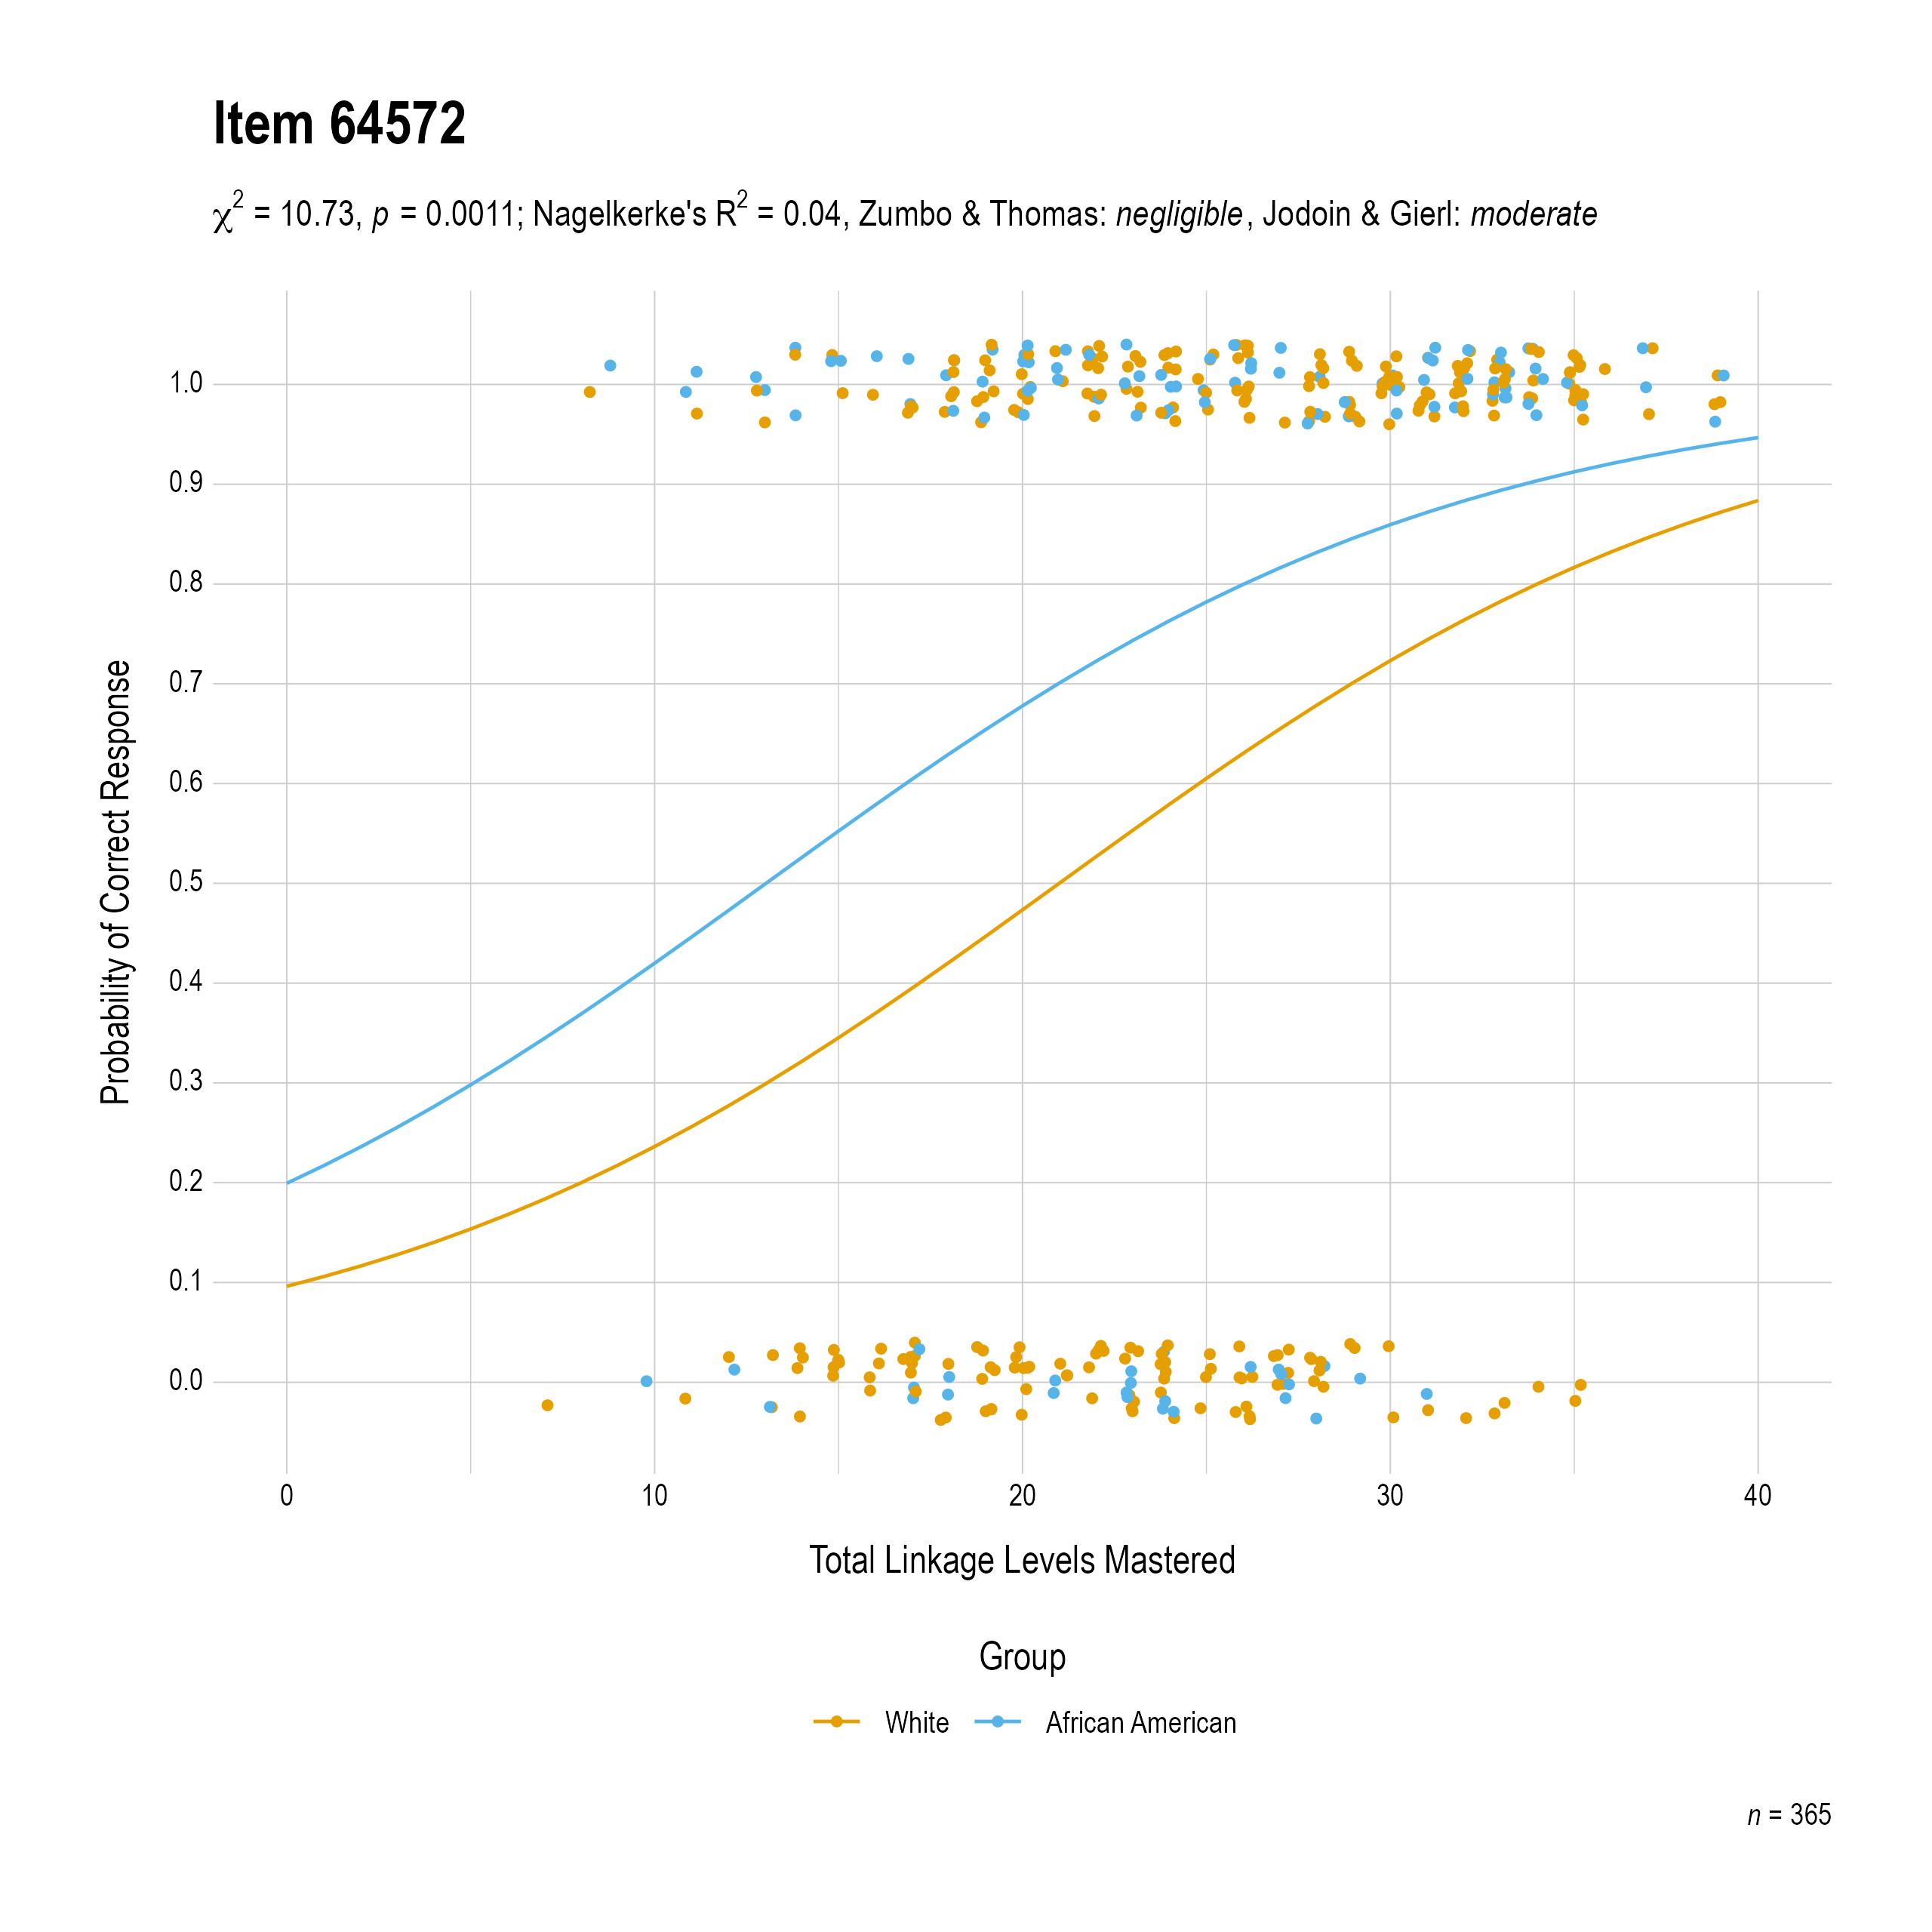 The plot of the uniform race differential item function evidence for Mathematics item 64572. The figure contains points shaded by group. The figure also contains a logistic regression curve for each group. The total linkage levels mastered in is on the x-axis, and the probability of a correct response is on the y-axis.